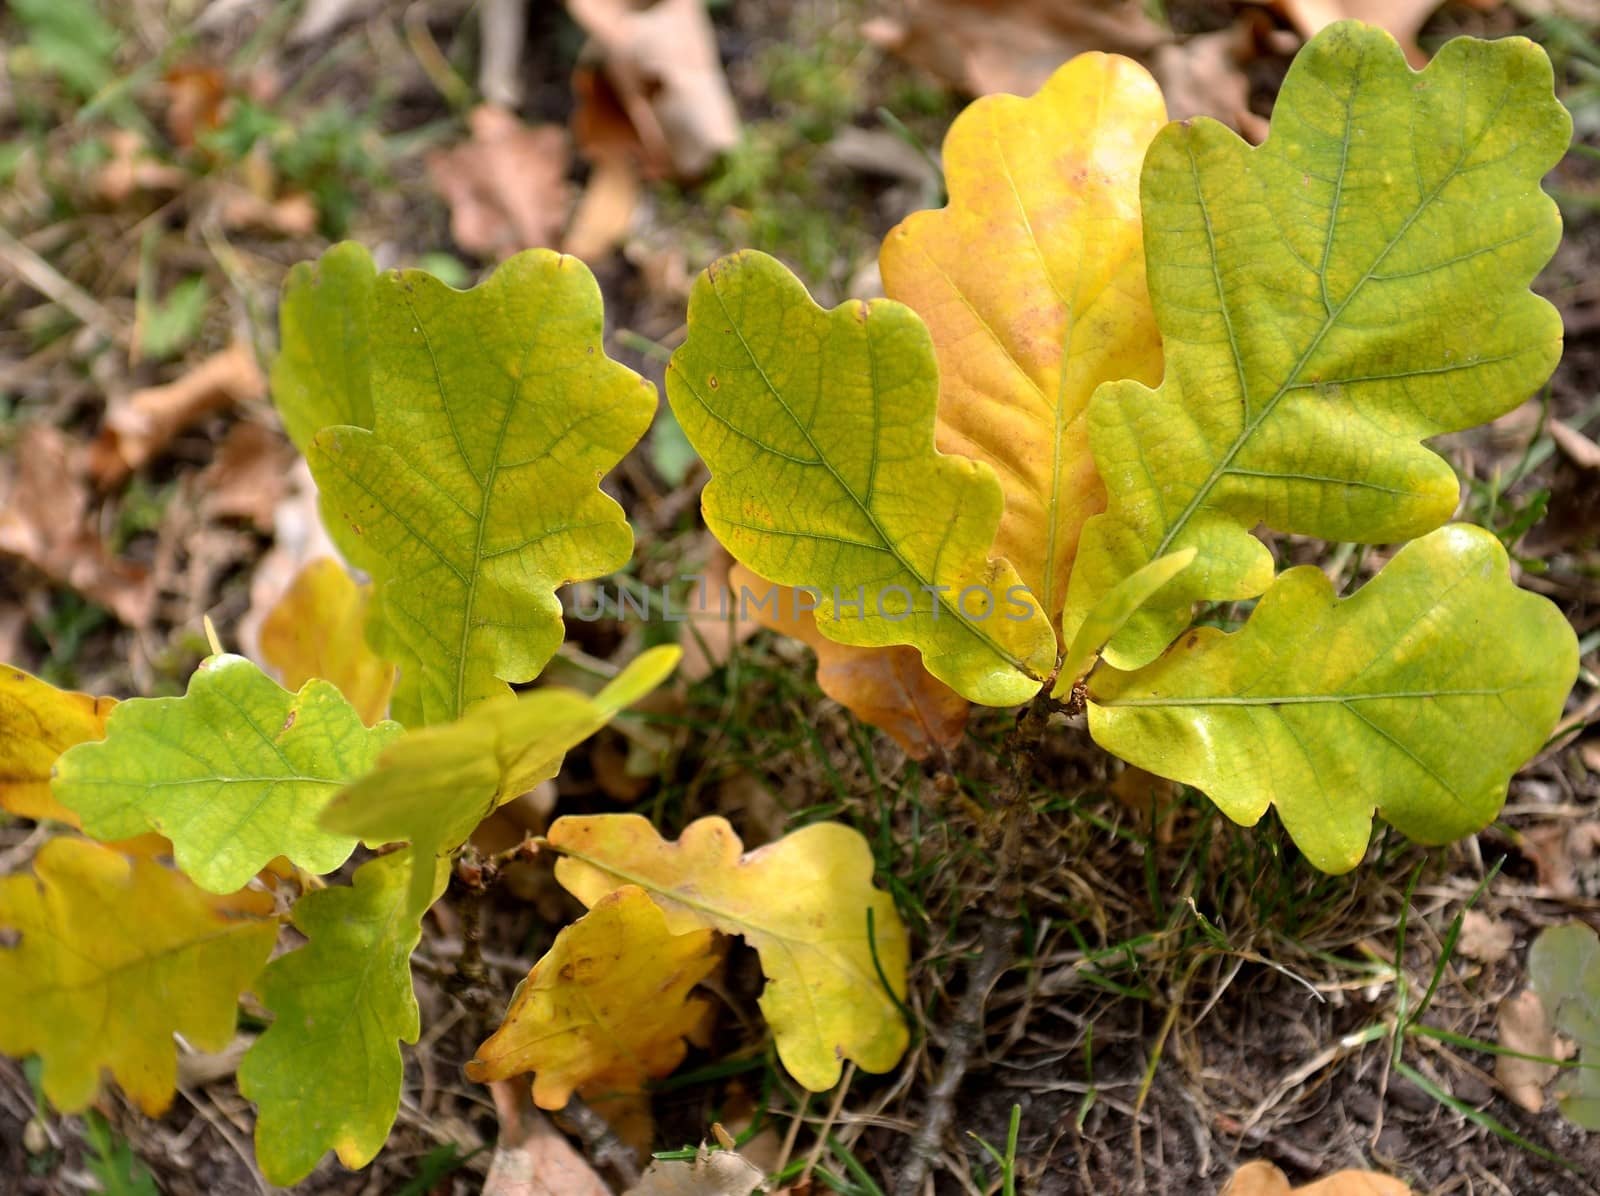 Autumn colored oak leaves on the forest floor